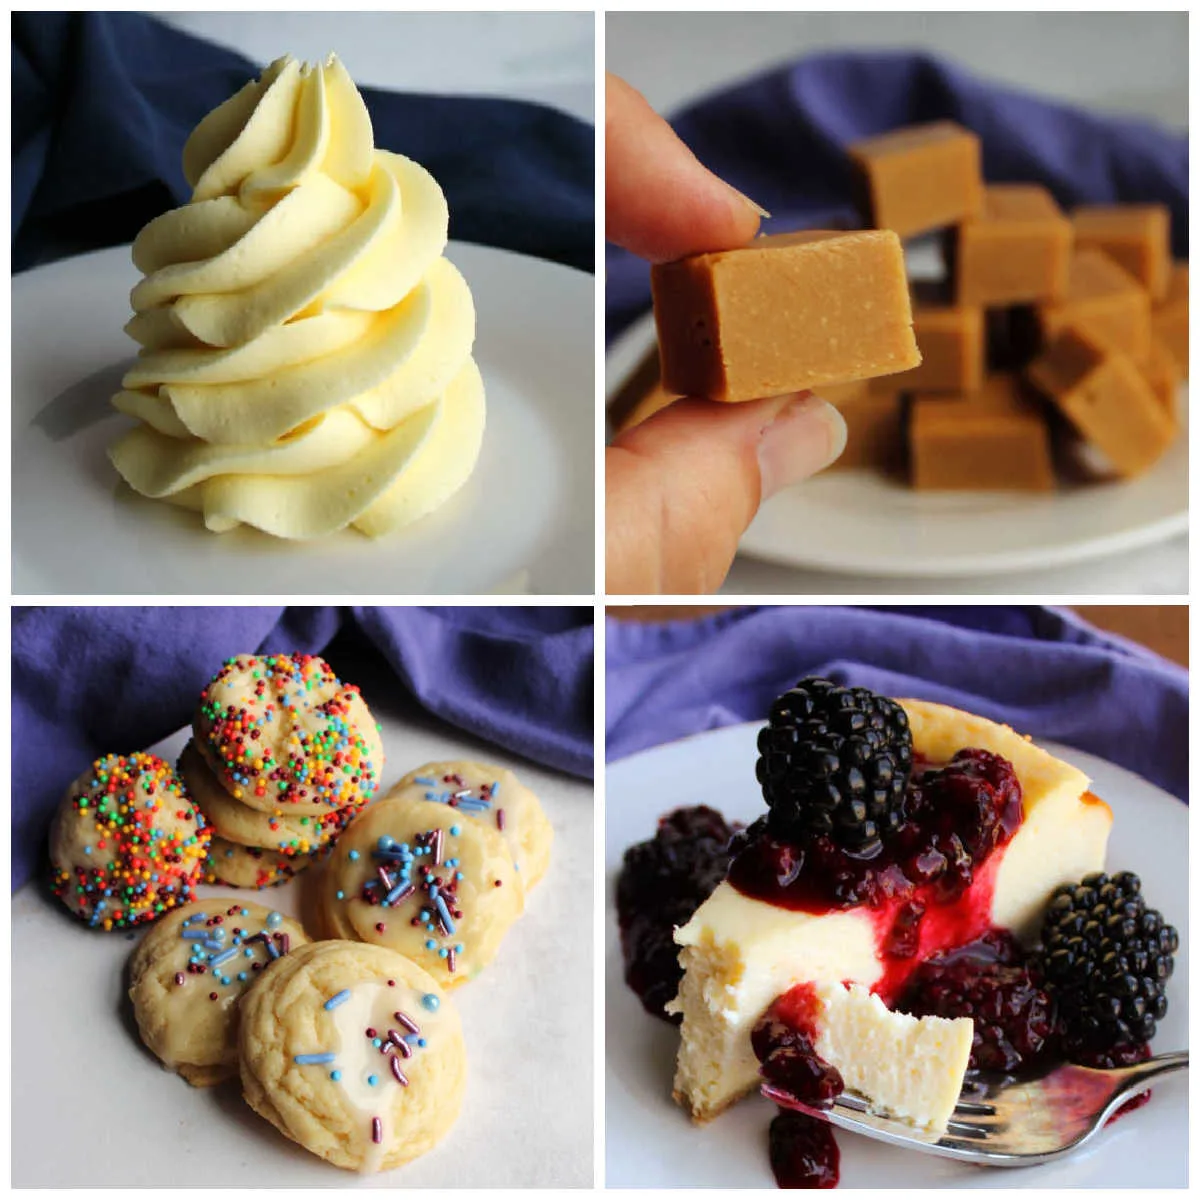 Collage of images depicting frosting, fudge, cookies and cheesecake all made with sweetened condensed milk as an ingredient.